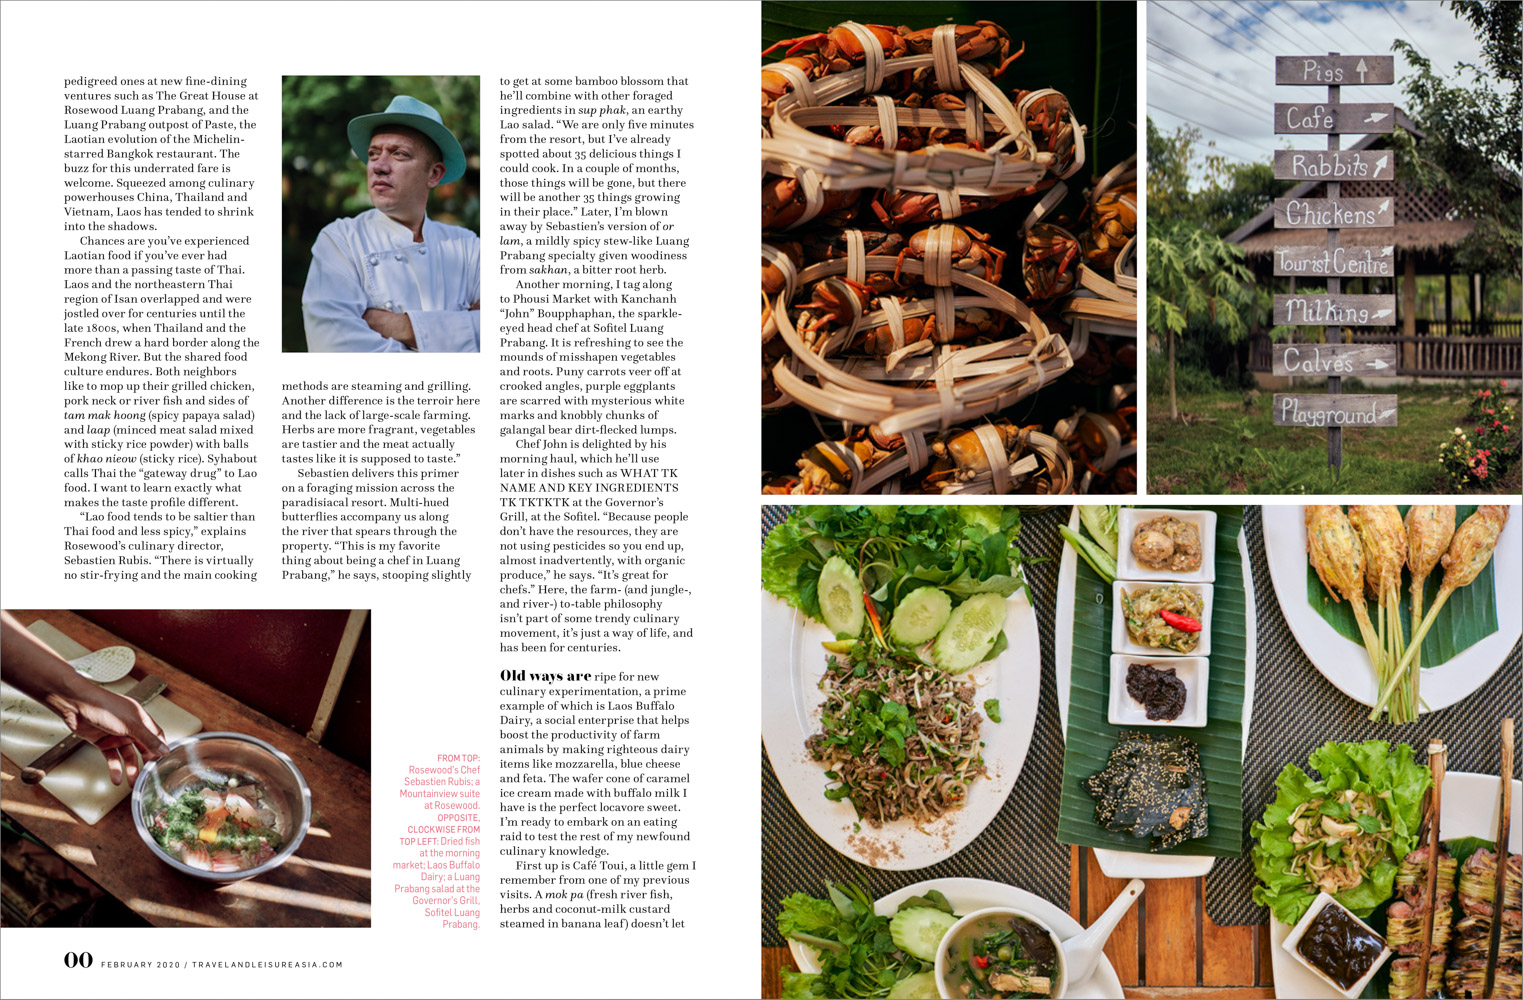 From a travel story on Laotian cuisine in Luang Prabang. 